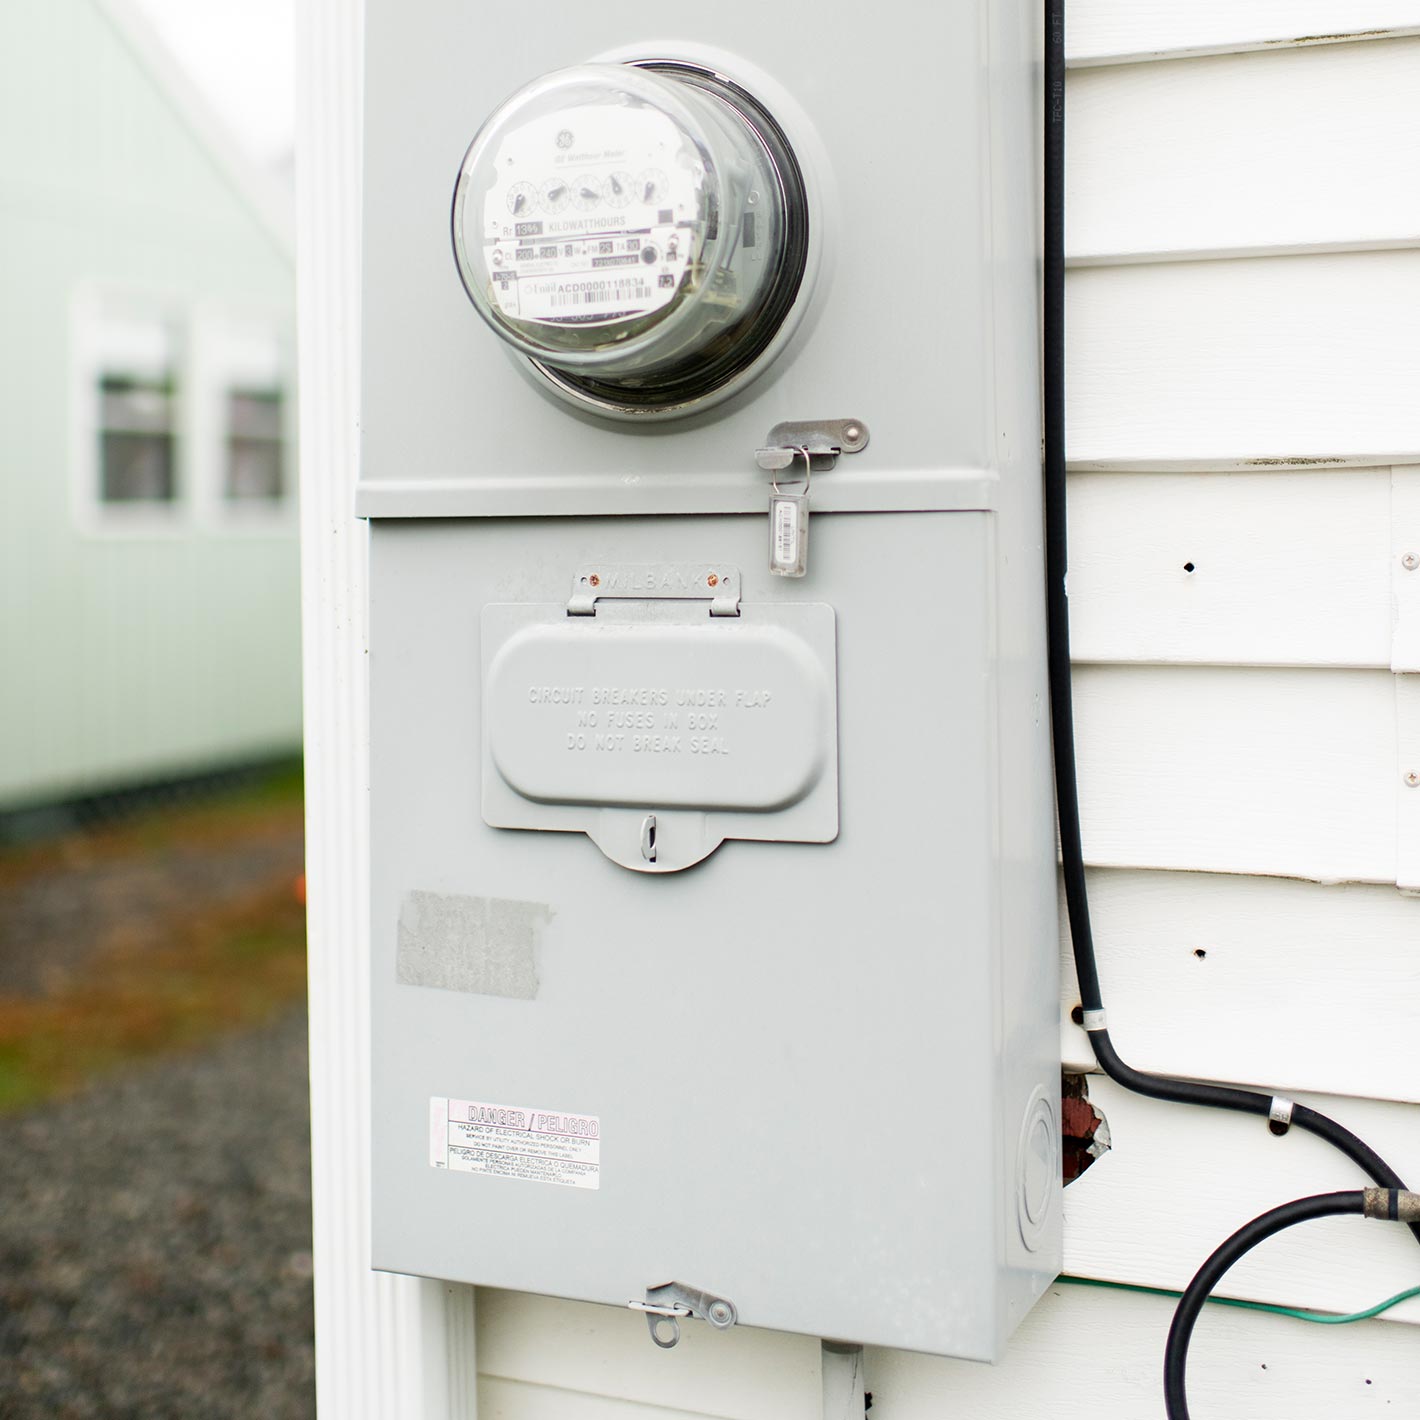 electric meter on side of house